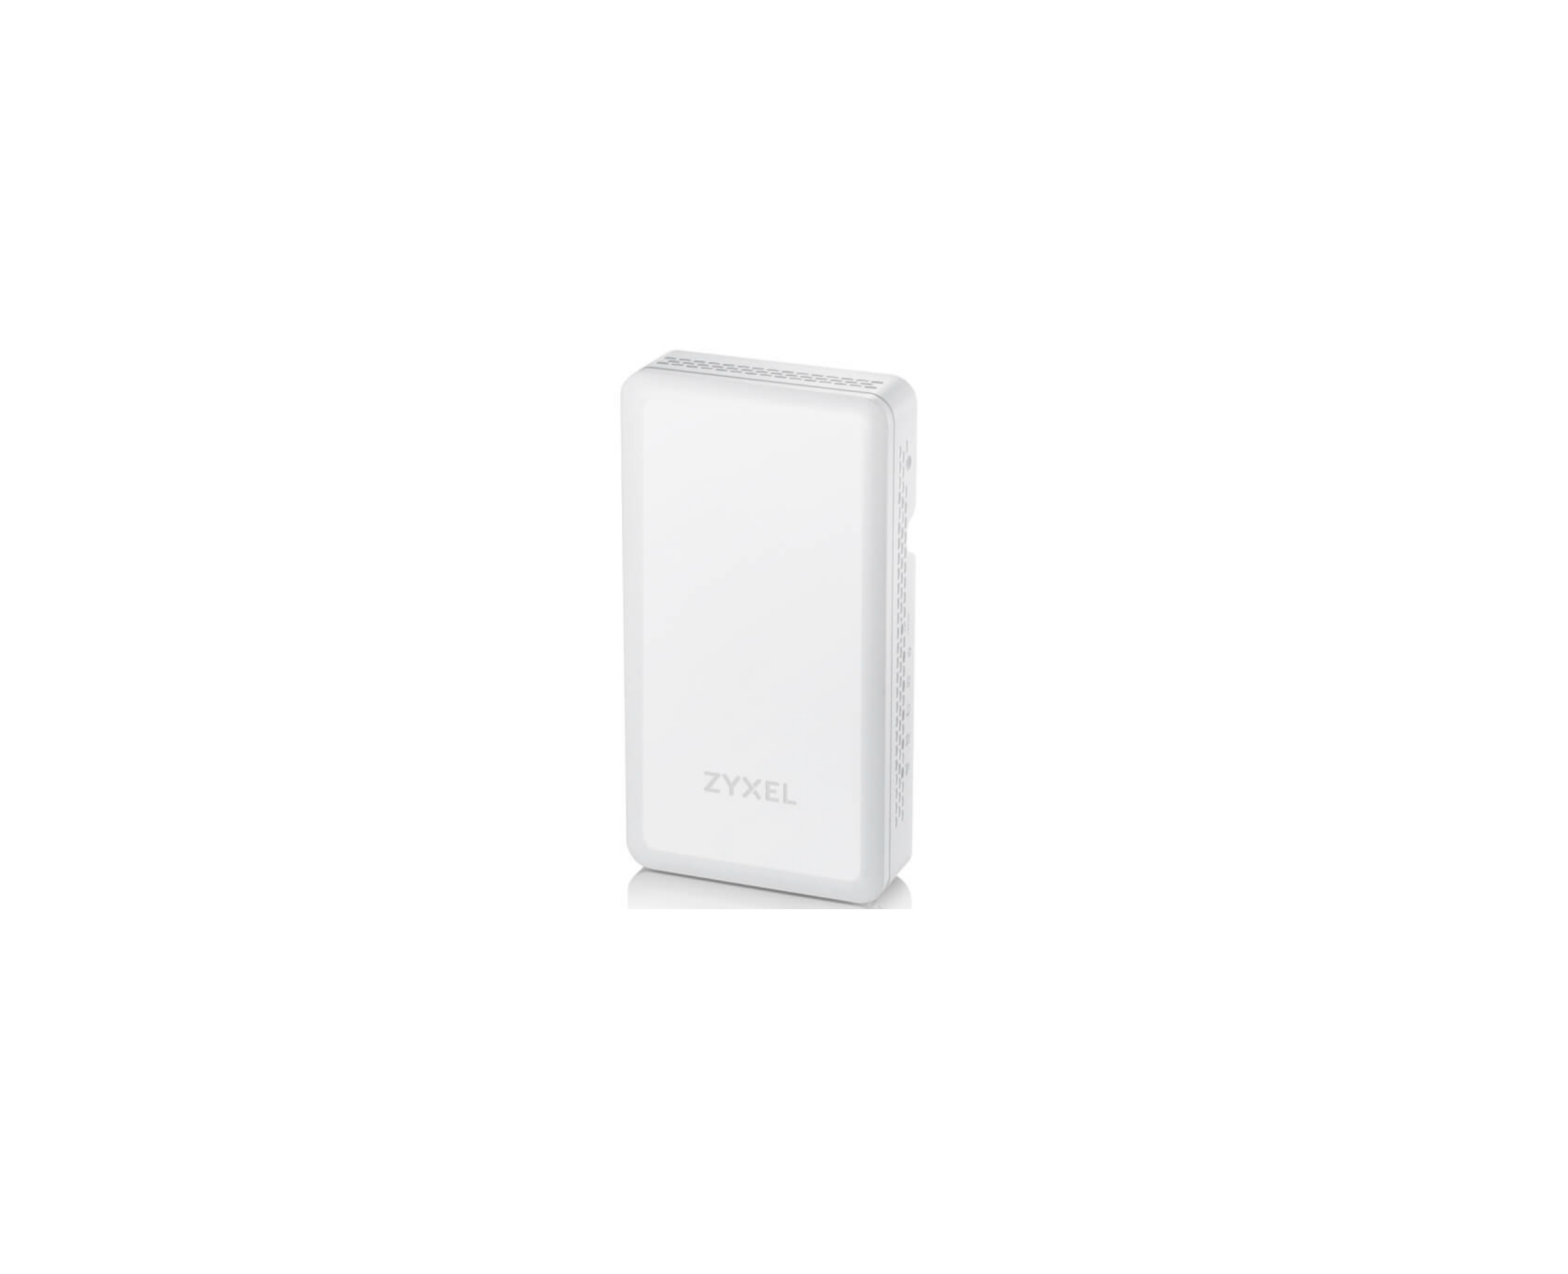 ZYXEL WAC5302D-Sv2 802.11ac Wall-Plate PoE Access Point User Guide